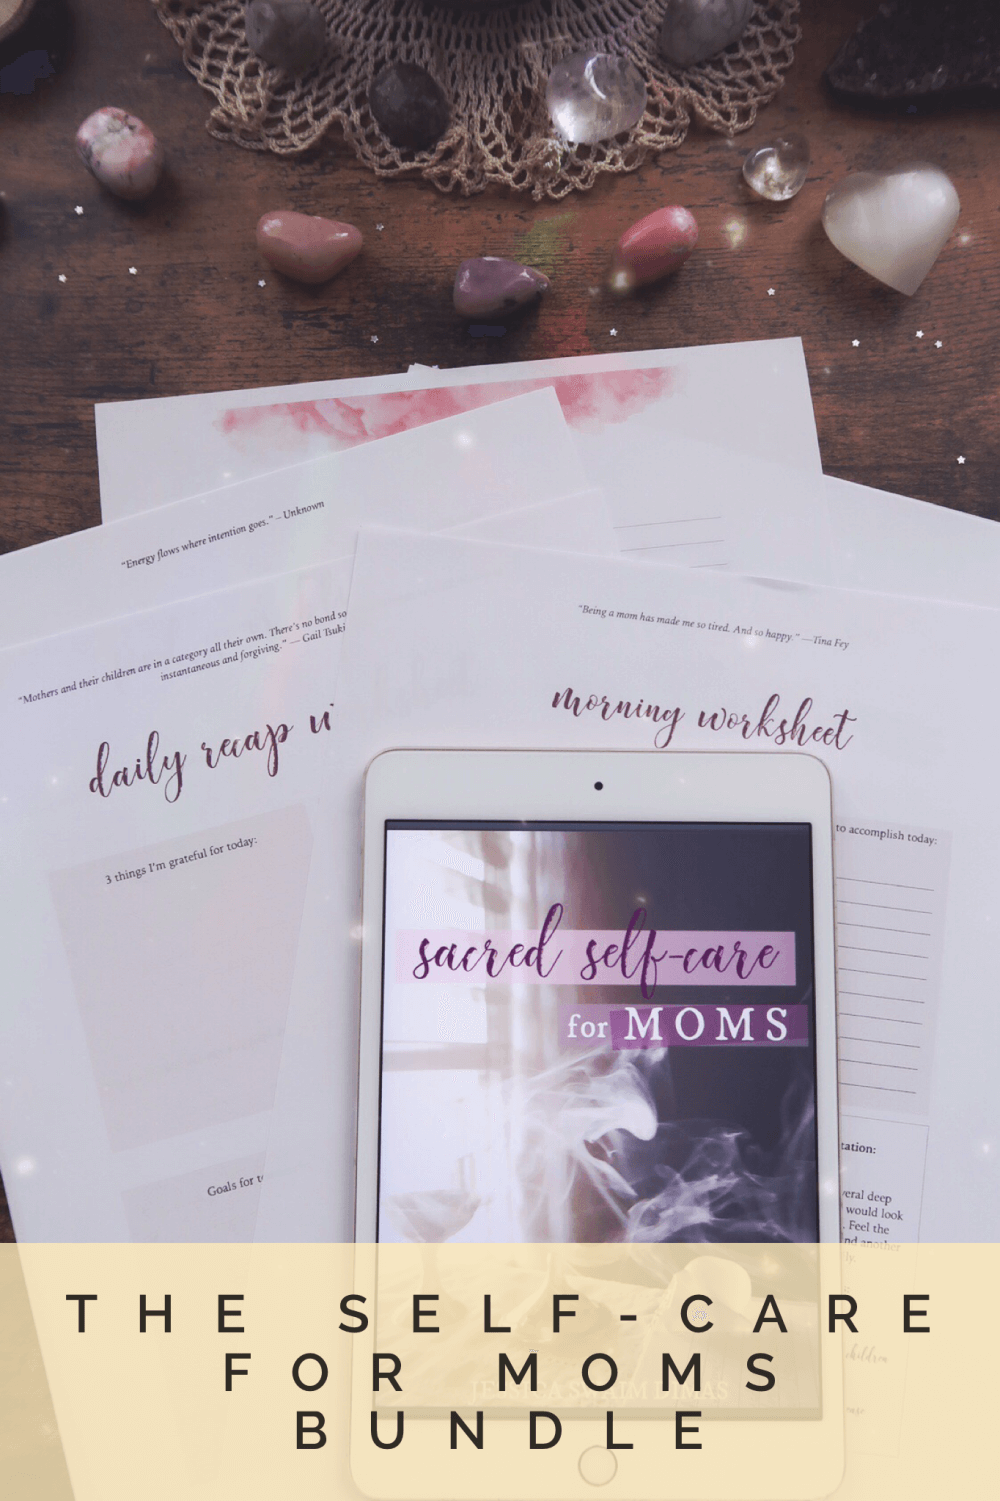 Self-care for moms guide and worksheet bundle by Jessica Dimas